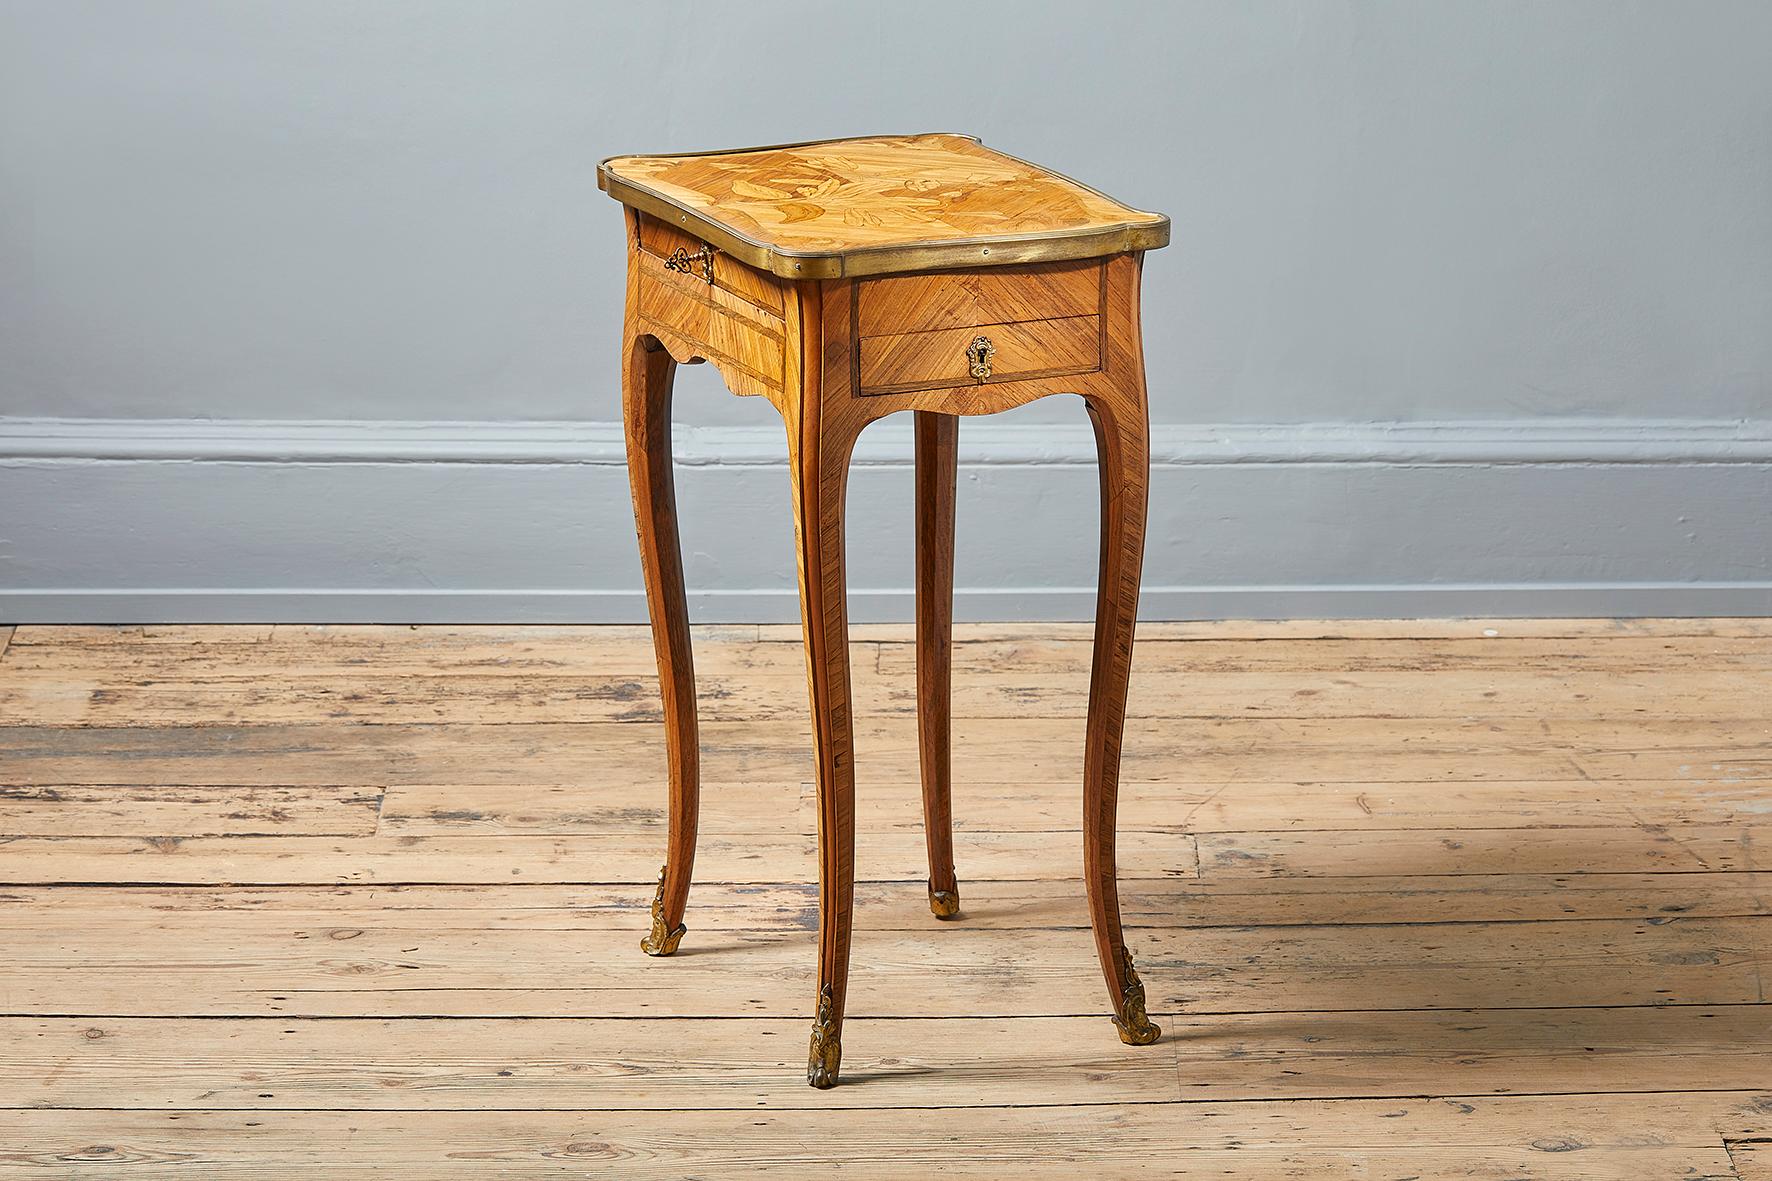 A fine French ormolu-mounted tulipwood, kingwood and Marquetry table an ecrire, circa 1850, the top inlaid with tulips and poppies within a cartouche, above a frieze drawer and two side drawers, on cabriole legs and sabots.